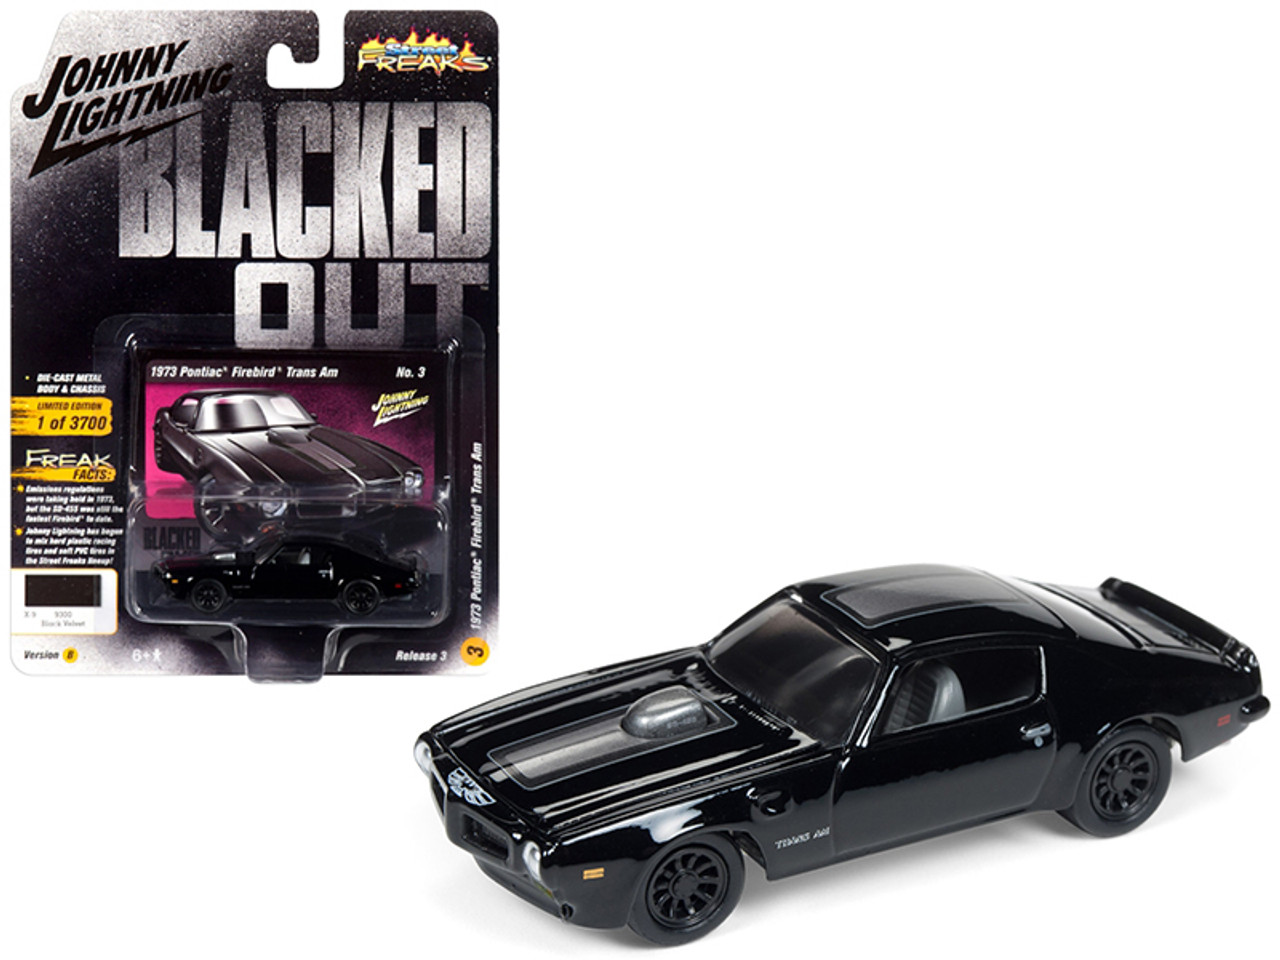 1973 Pontiac Firebird Trans Am Gloss Black with Dark Silver Stripe "Blacked Out" Limited Edition to 3700 pieces Worldwide 1/64 Diecast Model Car by Johnny Lightning